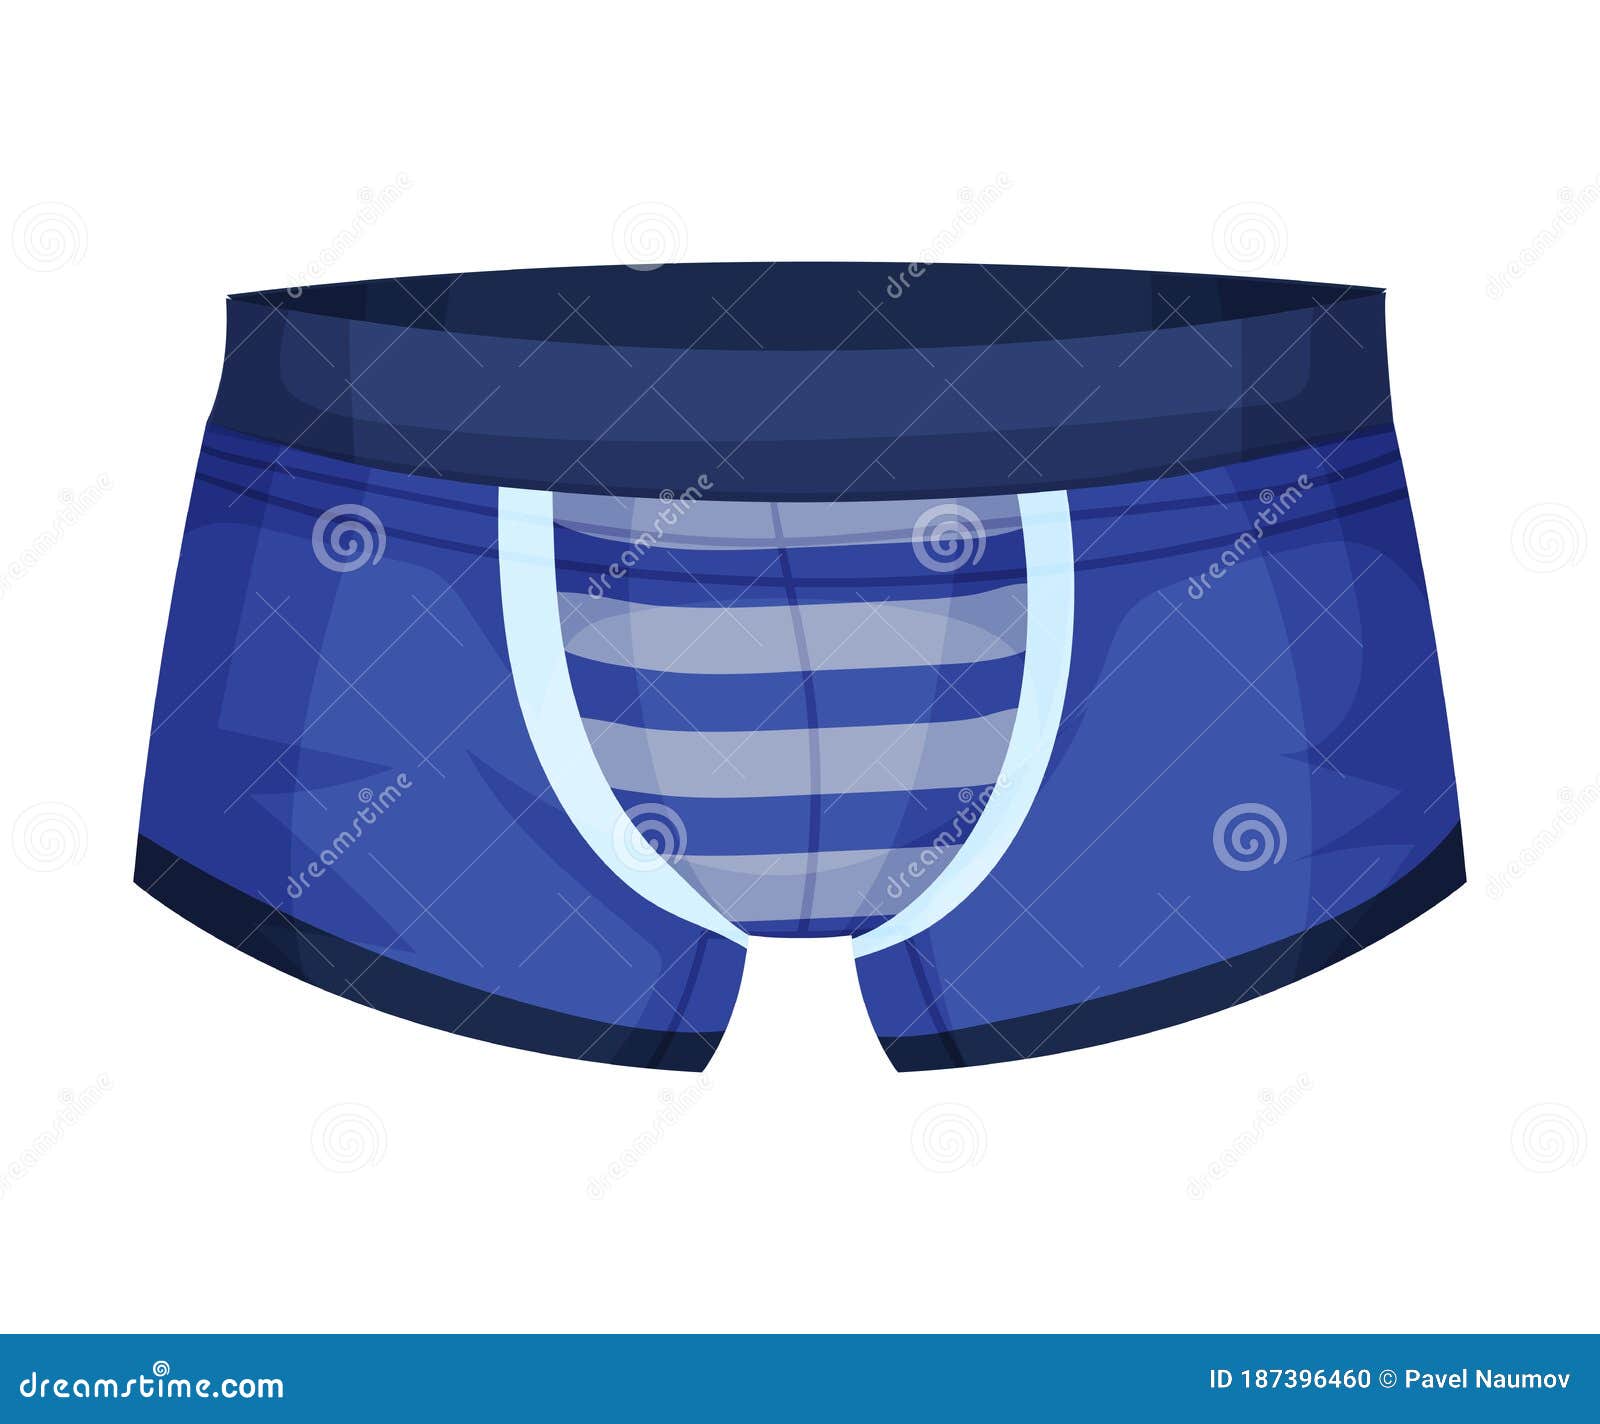 Tight Male Elastic Swimming Trunks Isolated on White Background Vector ...